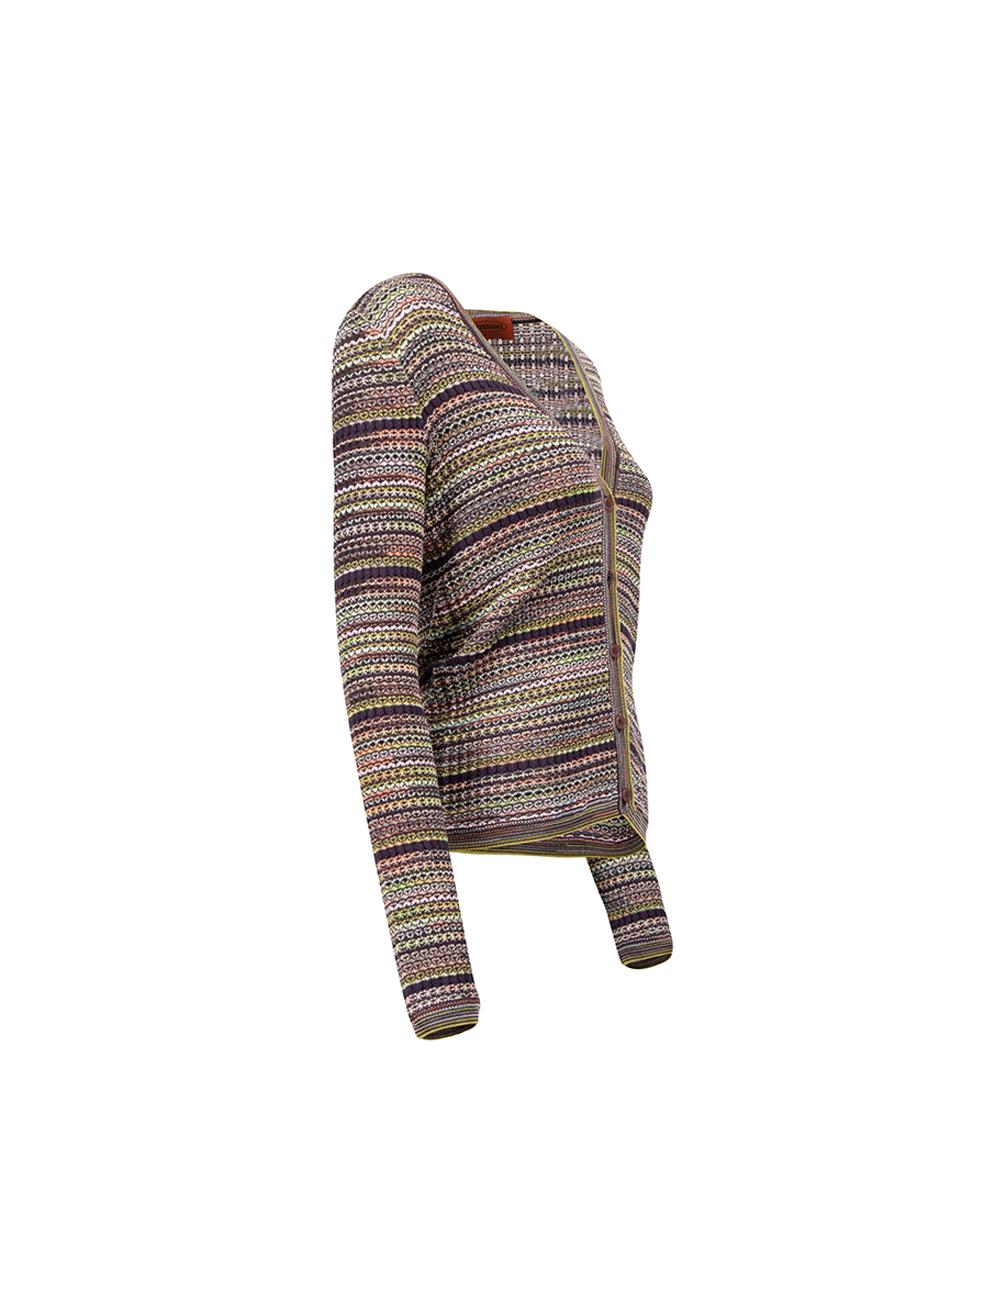 CONDITION is Very good. Hardly any visible wear to cardigan is evident on this used Missoni designer resale item. 
 
 Details
  Multicolour
 Wool and silk blend
 Knit cardigan
 Striped pattern
 Button up closure
 Long sleeves
 
 
 Made in Italy
 
